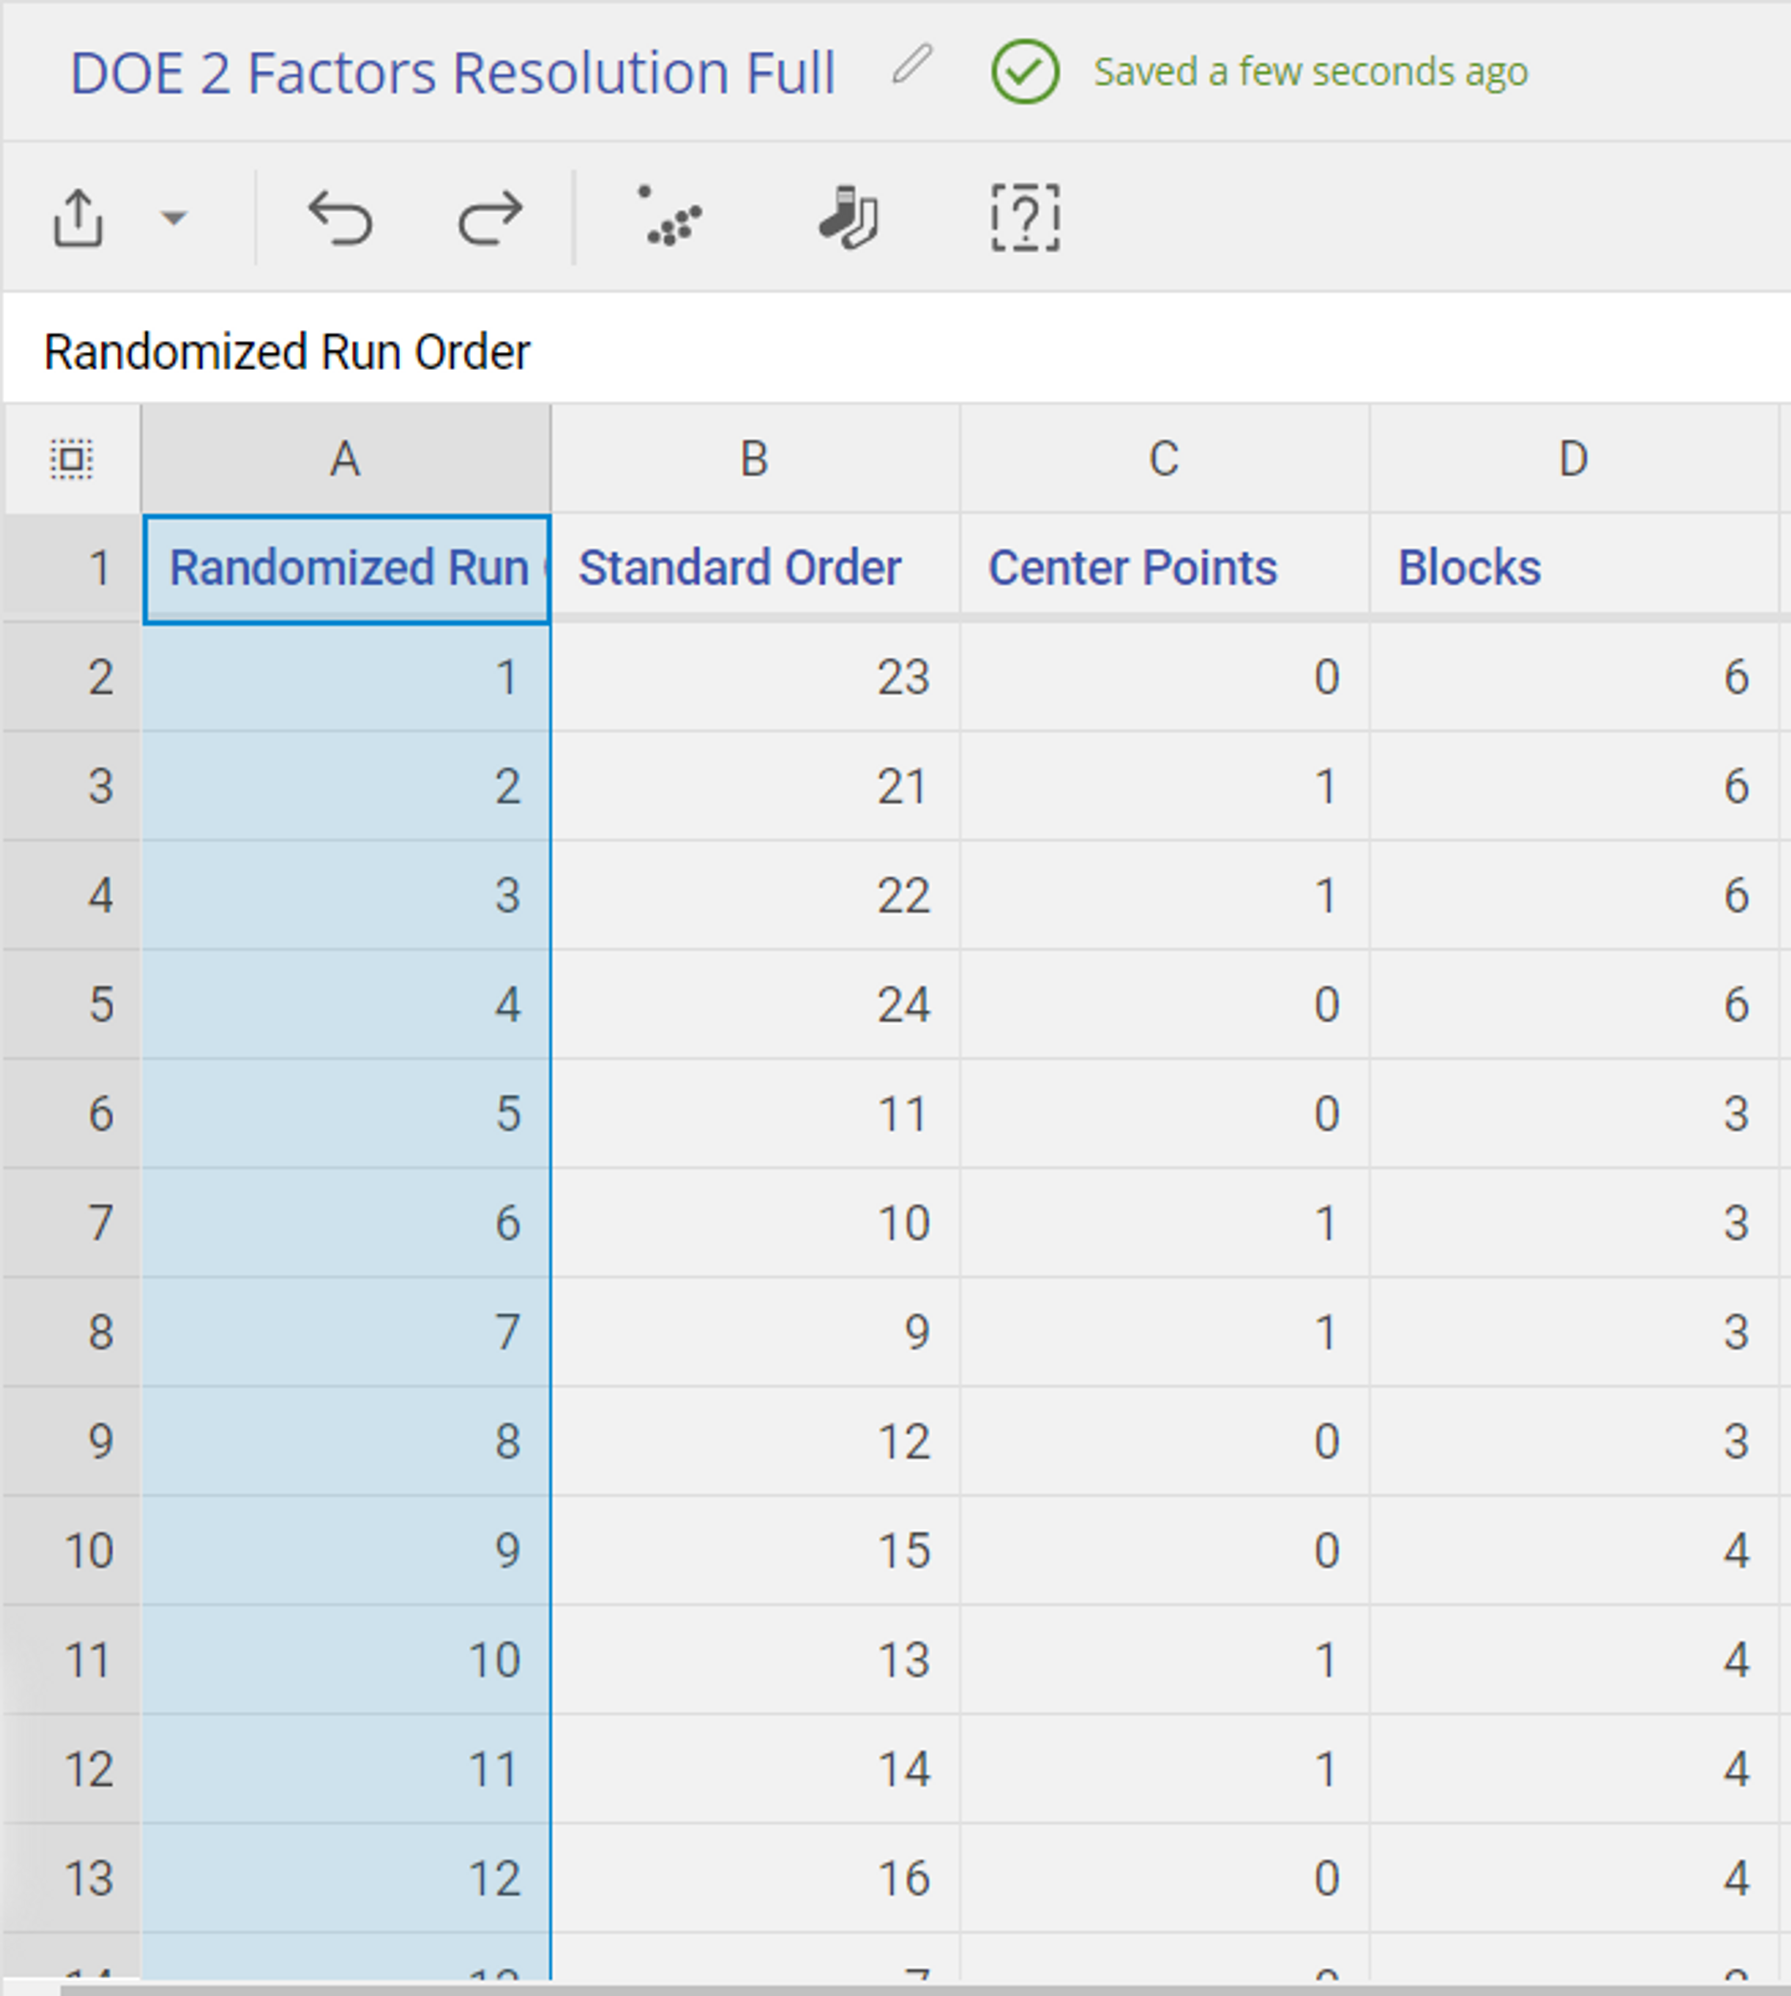 Data editor with Randomized Run Order highlighted and sorted in numeric order